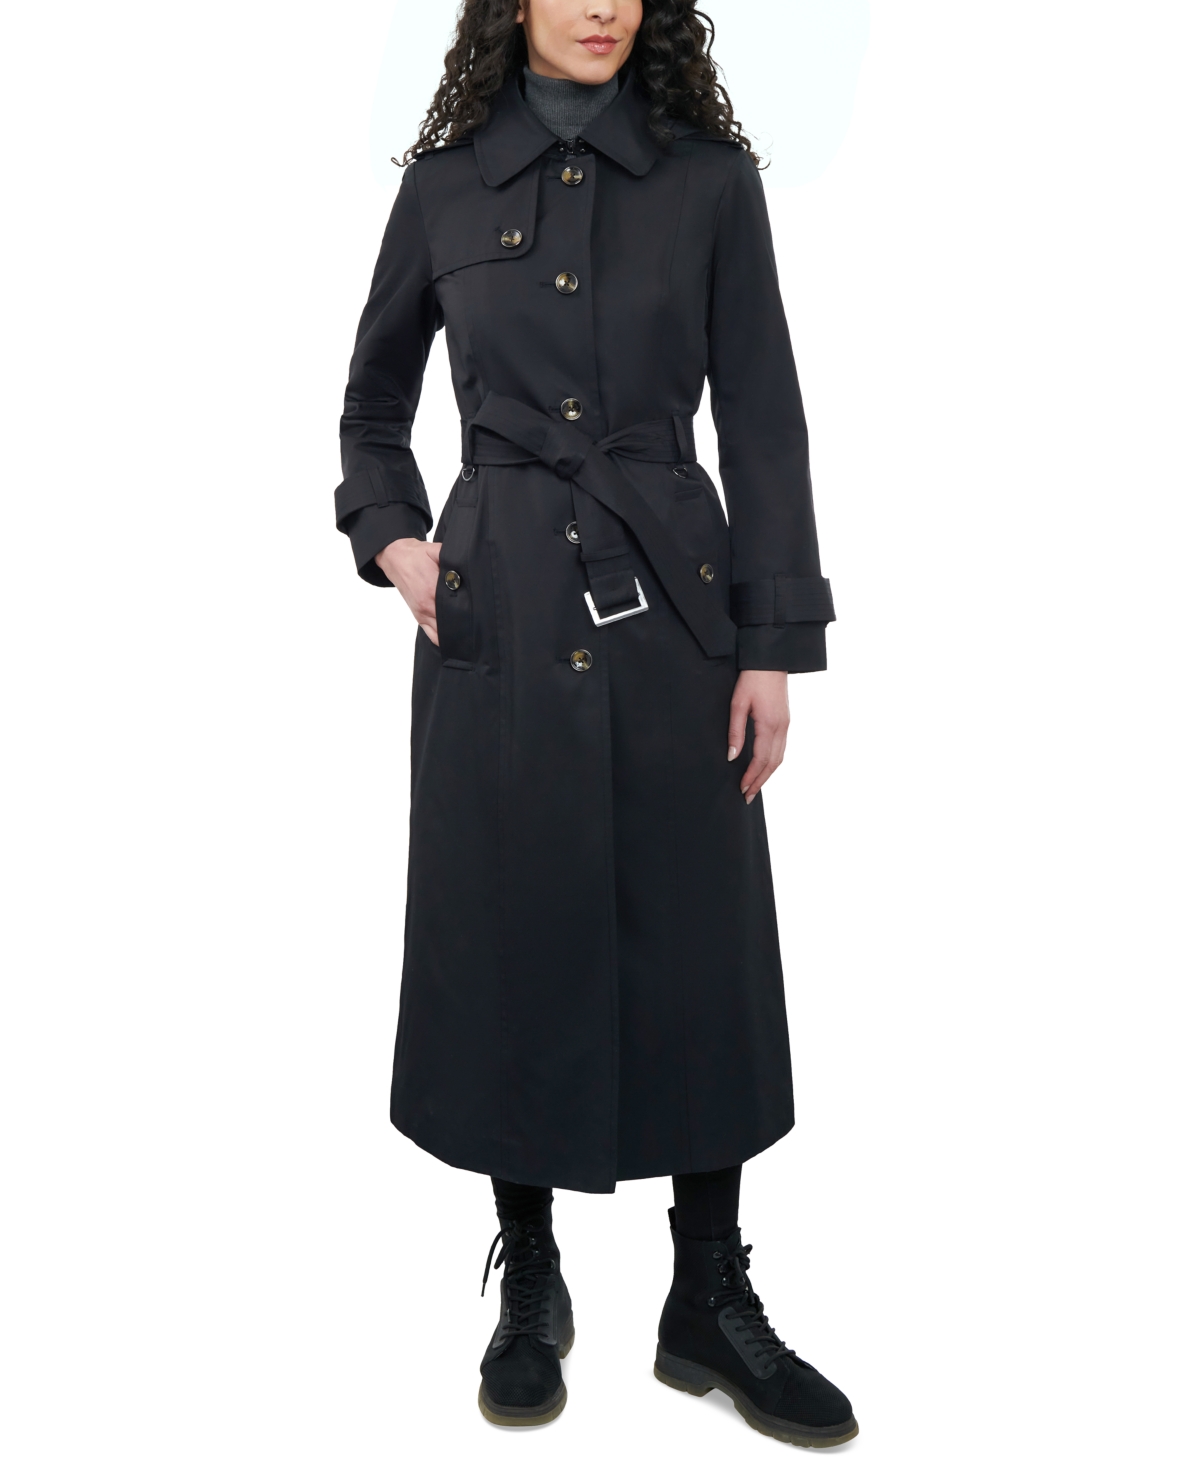 London Fog Women's Hooded Belted Maxi Trench Coat